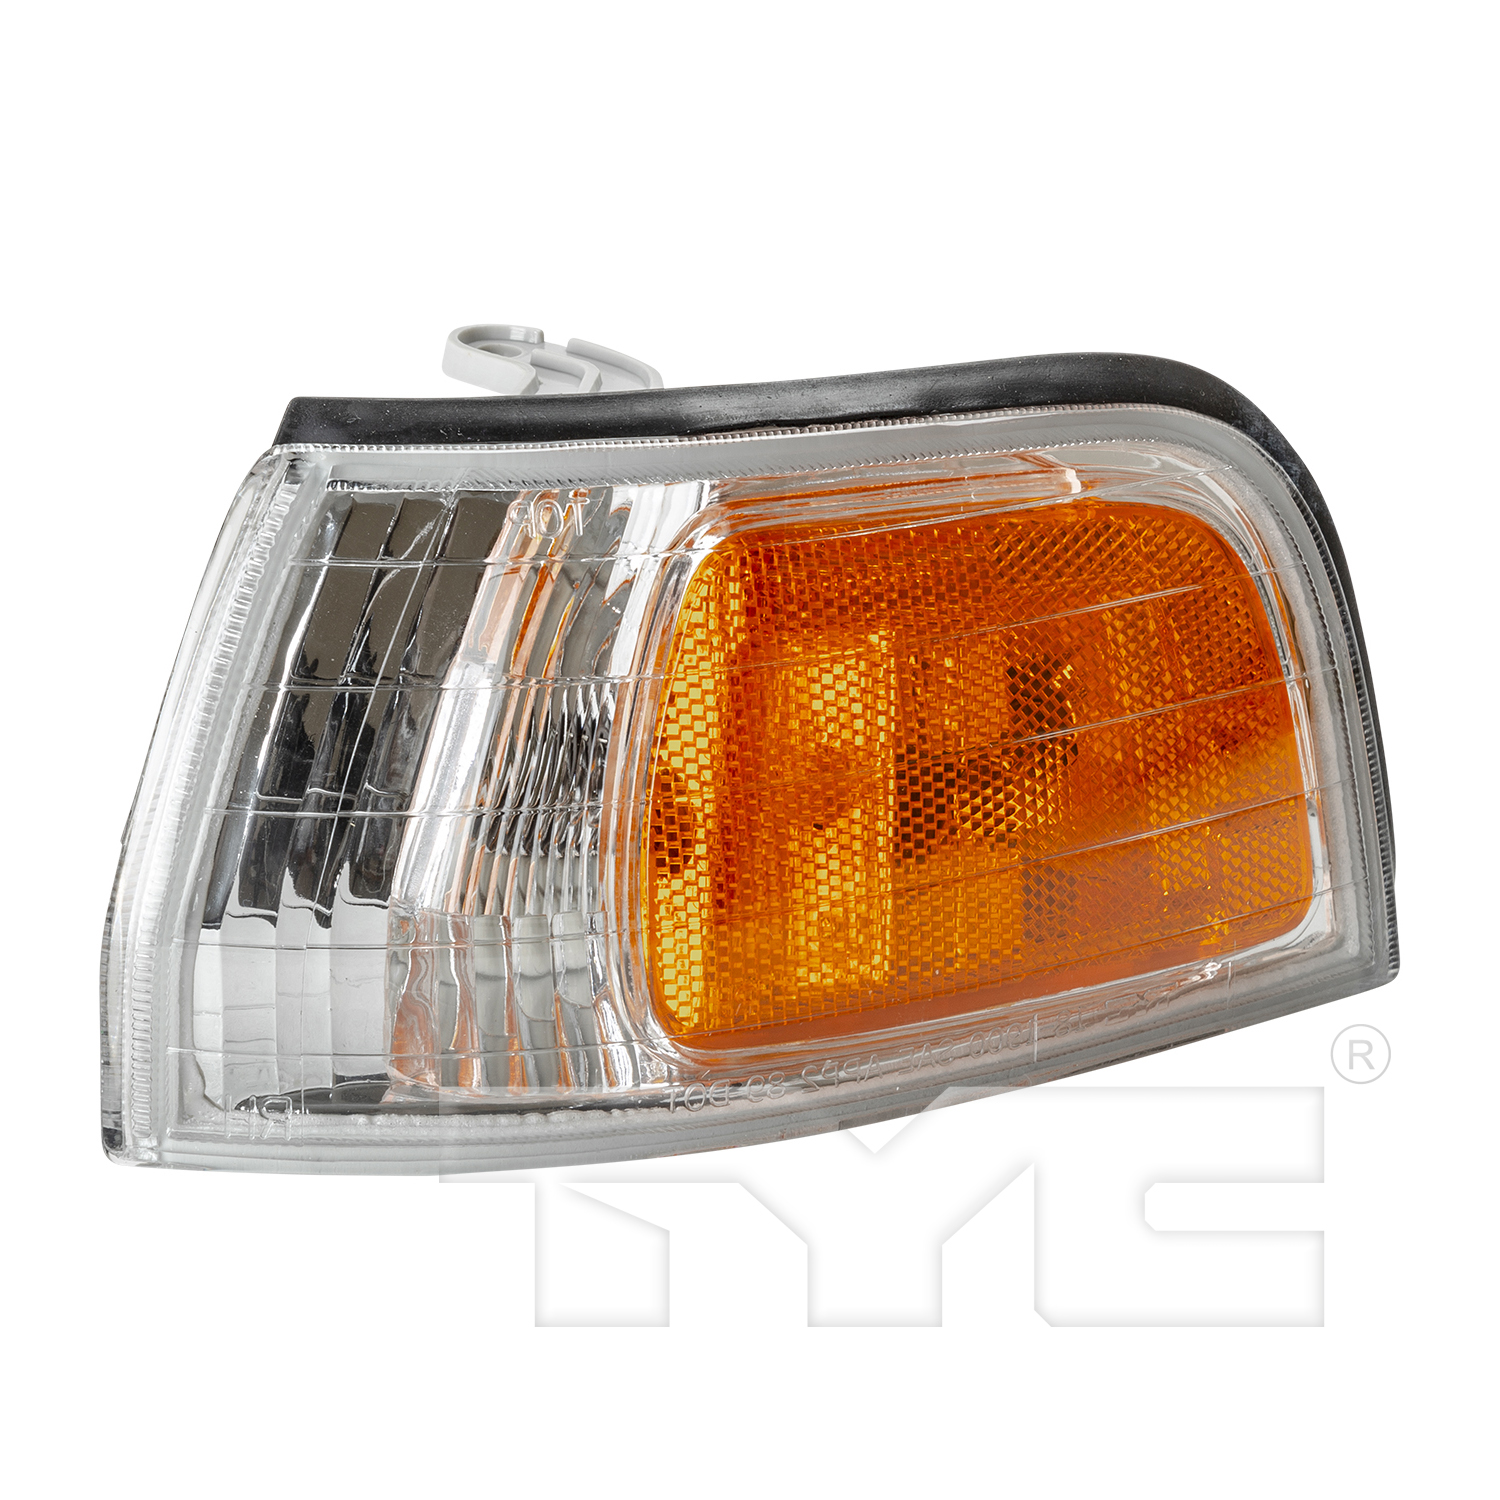 Aftermarket LAMPS for HONDA - ACCORD, ACCORD,92-93,LT Front marker lamp assy